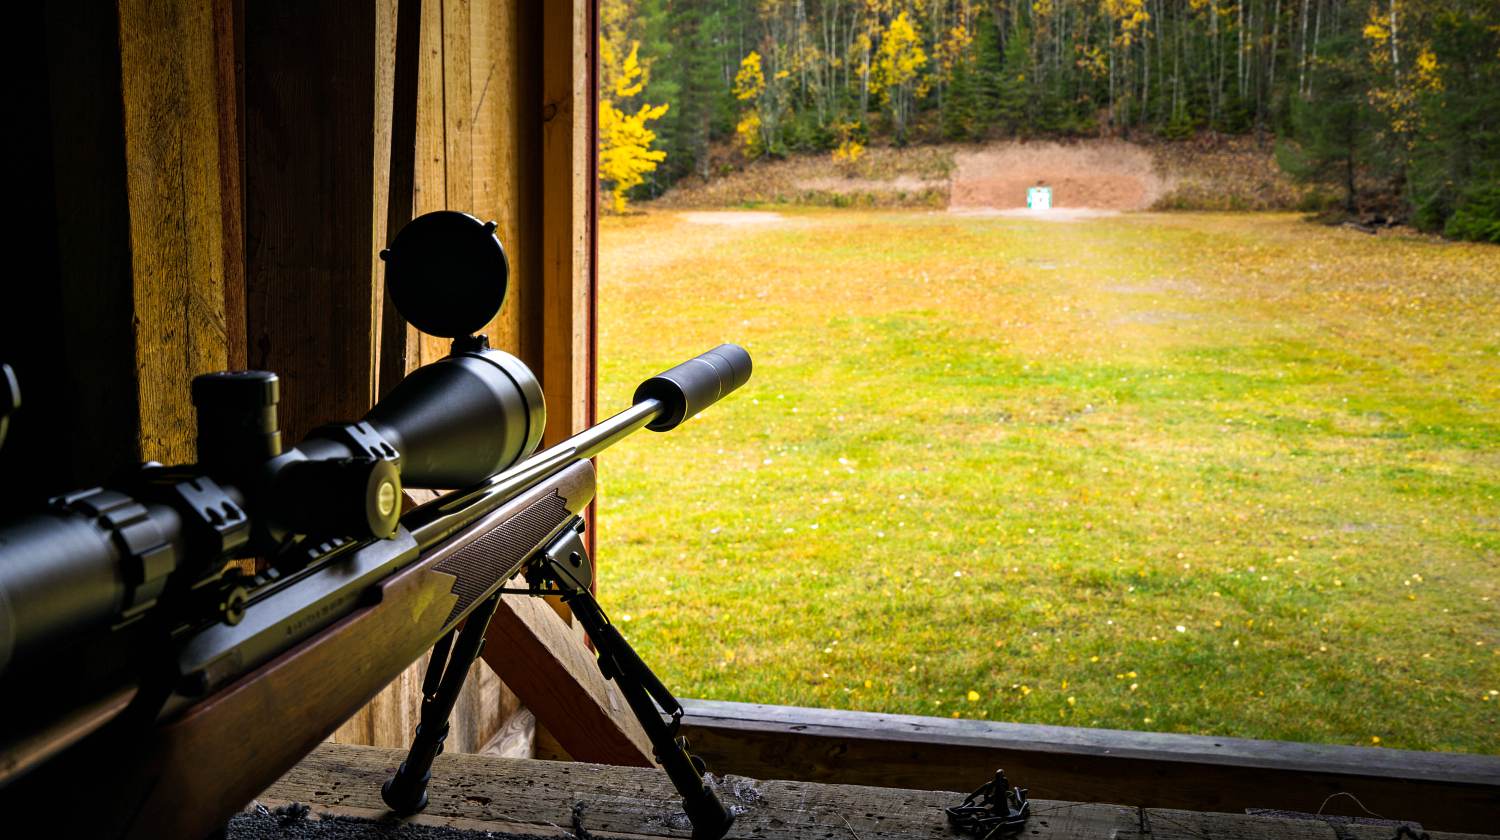 Feature | Sniper rifle with silencer and scope at shooting range | Long Distance Shooting: Choosing Your Gun And Ammo